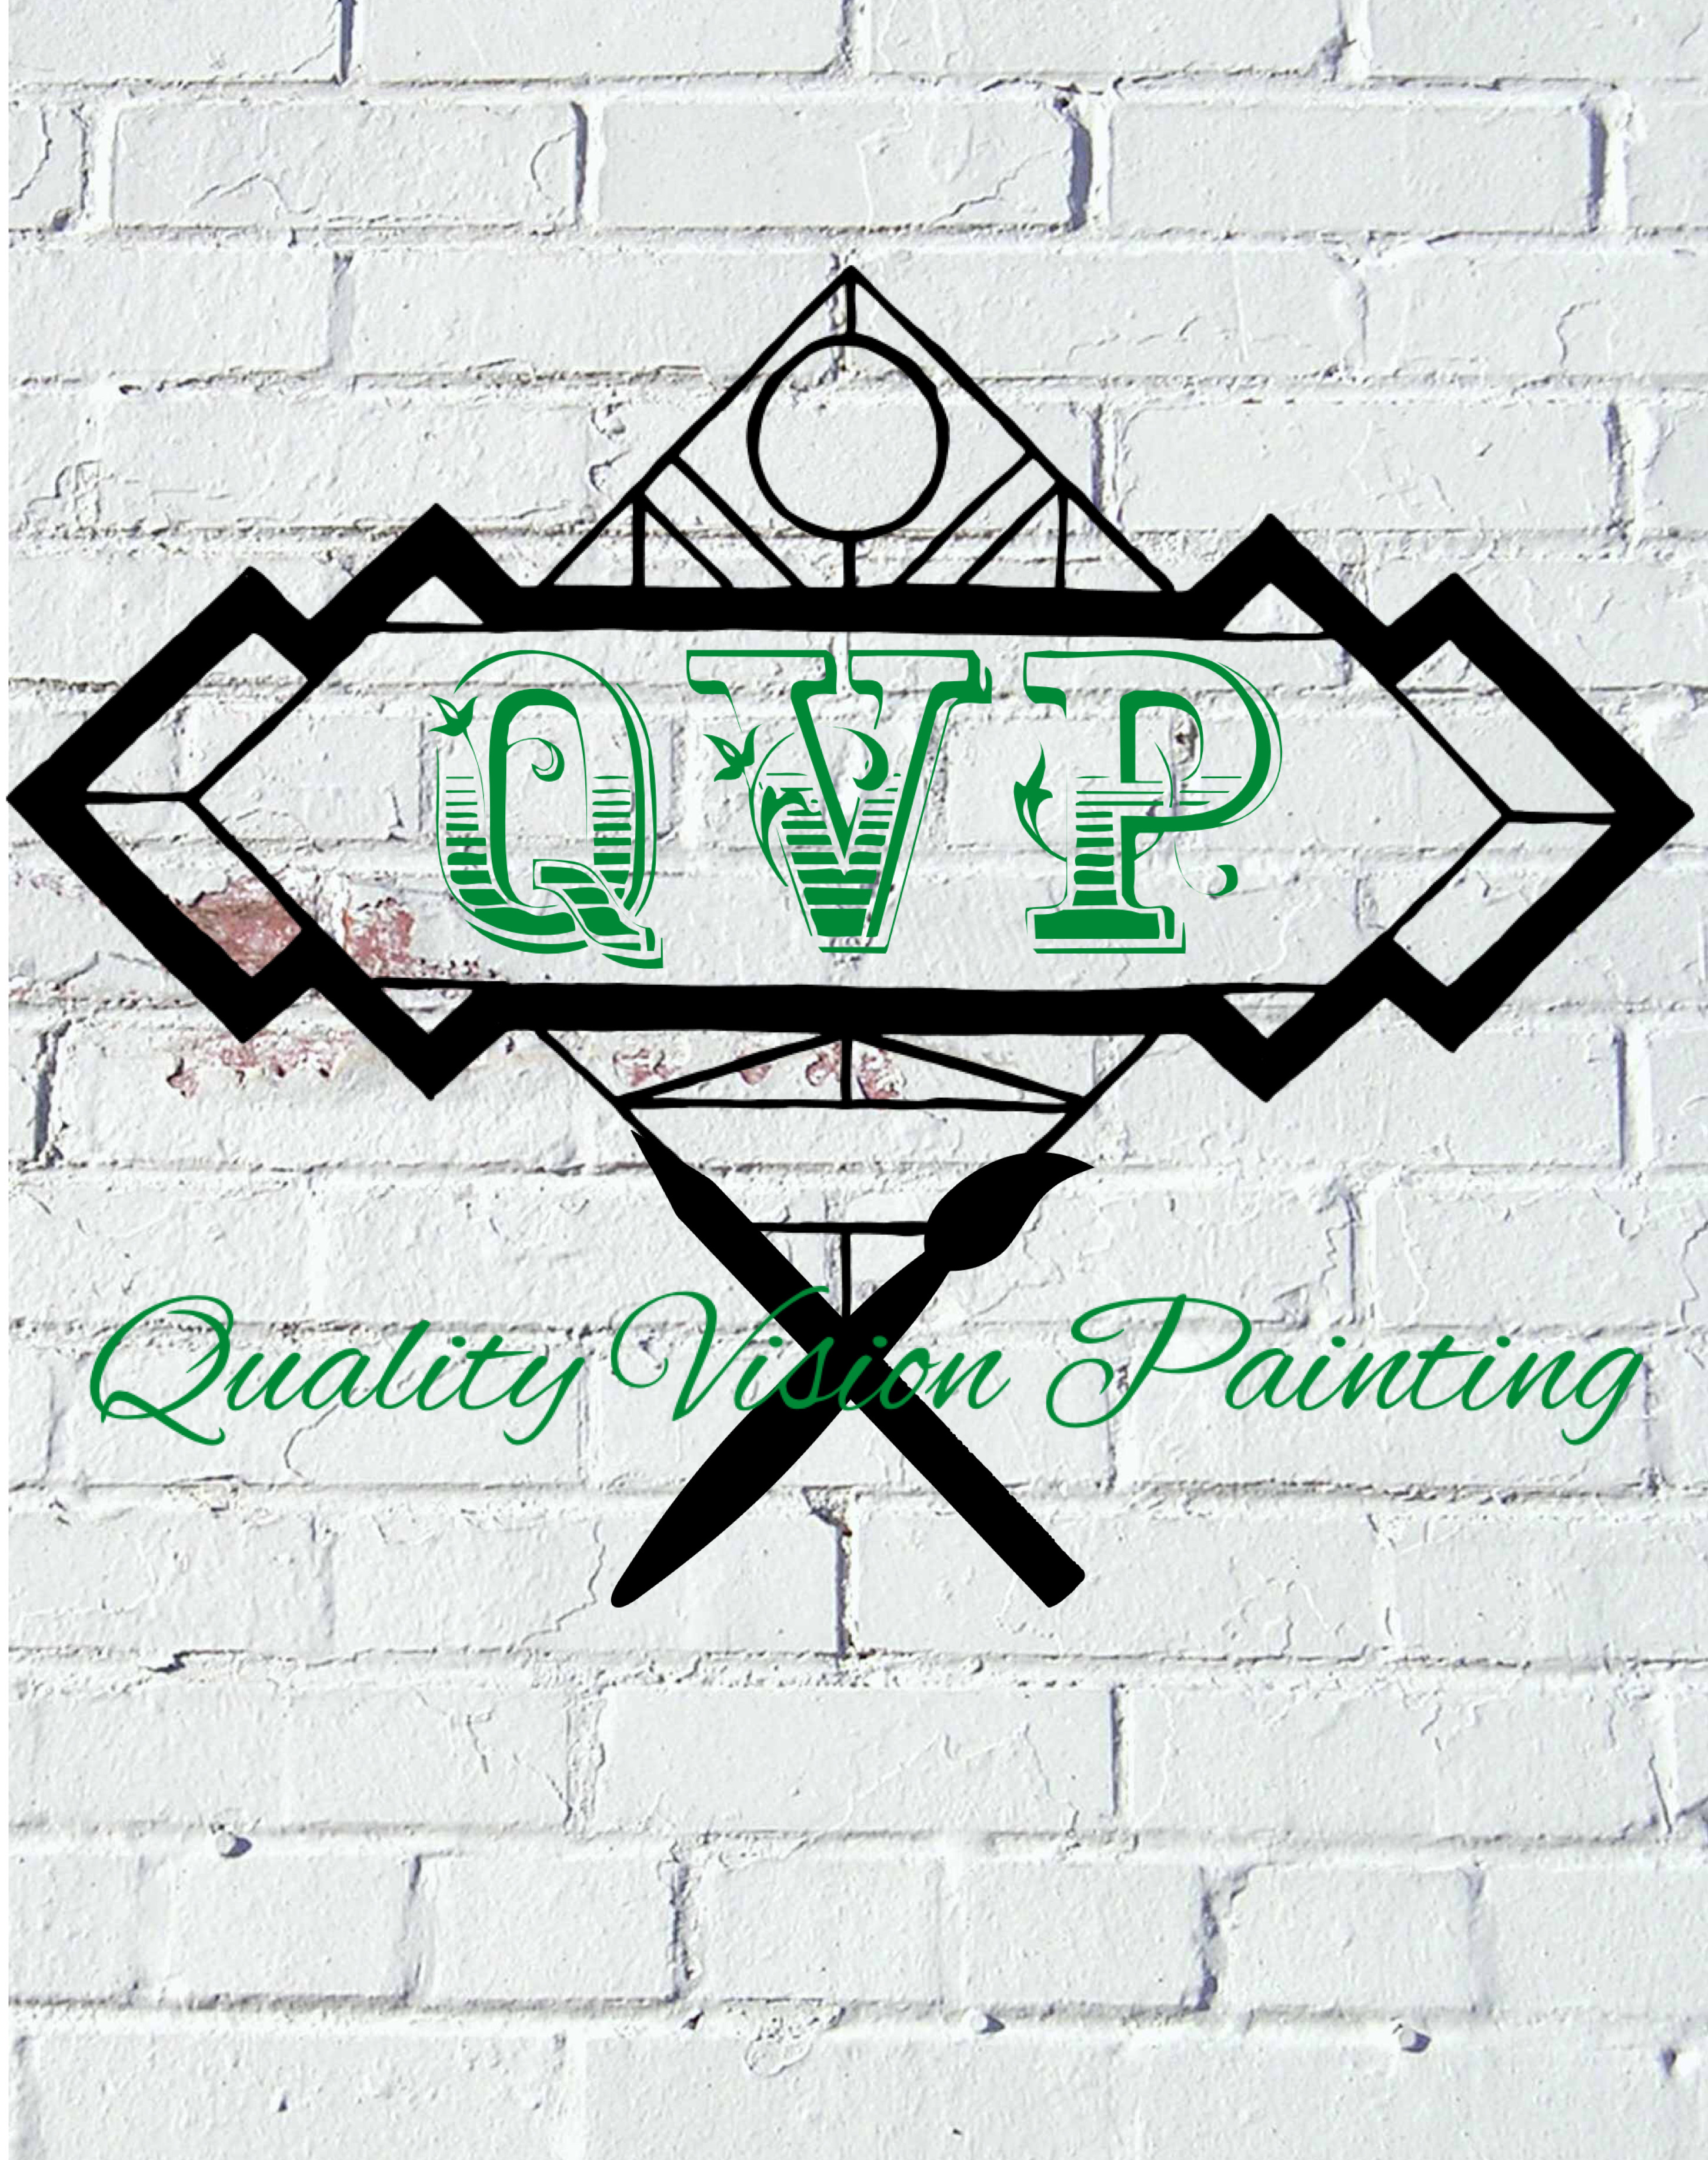 Quality Vision Painting Logo